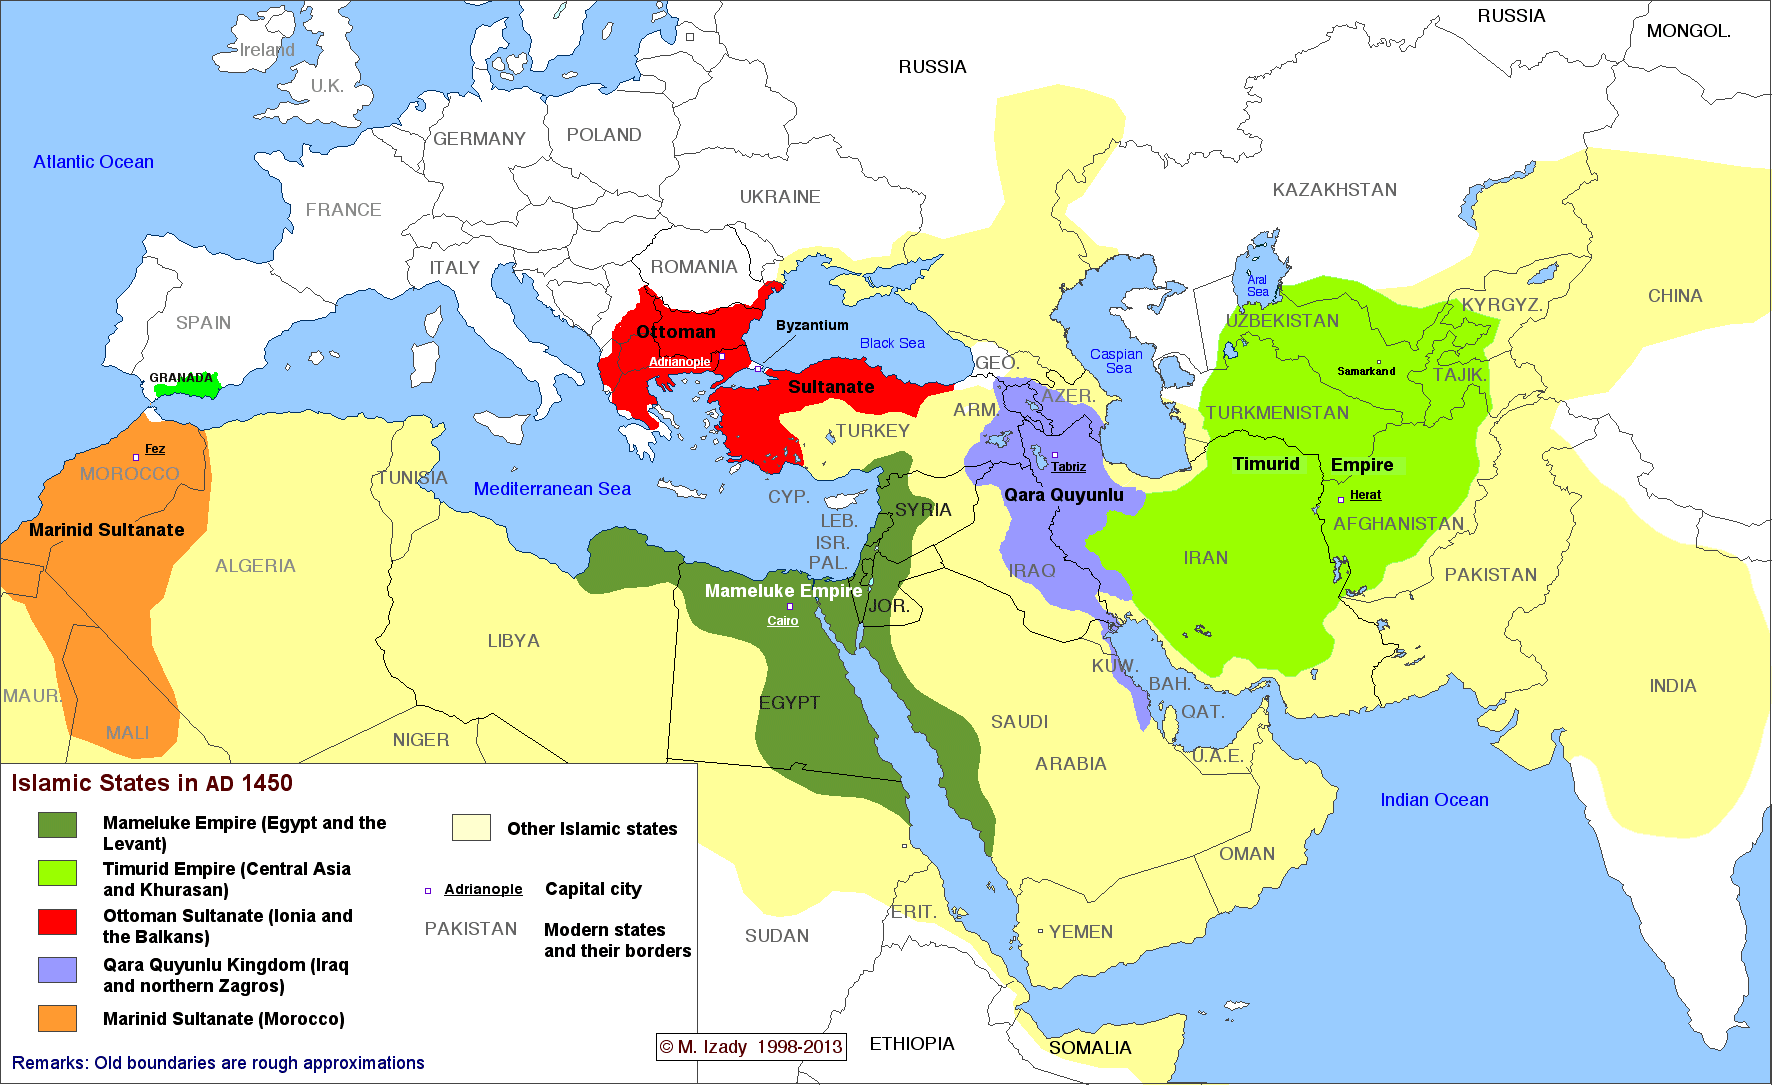 The complete history of Islamic states